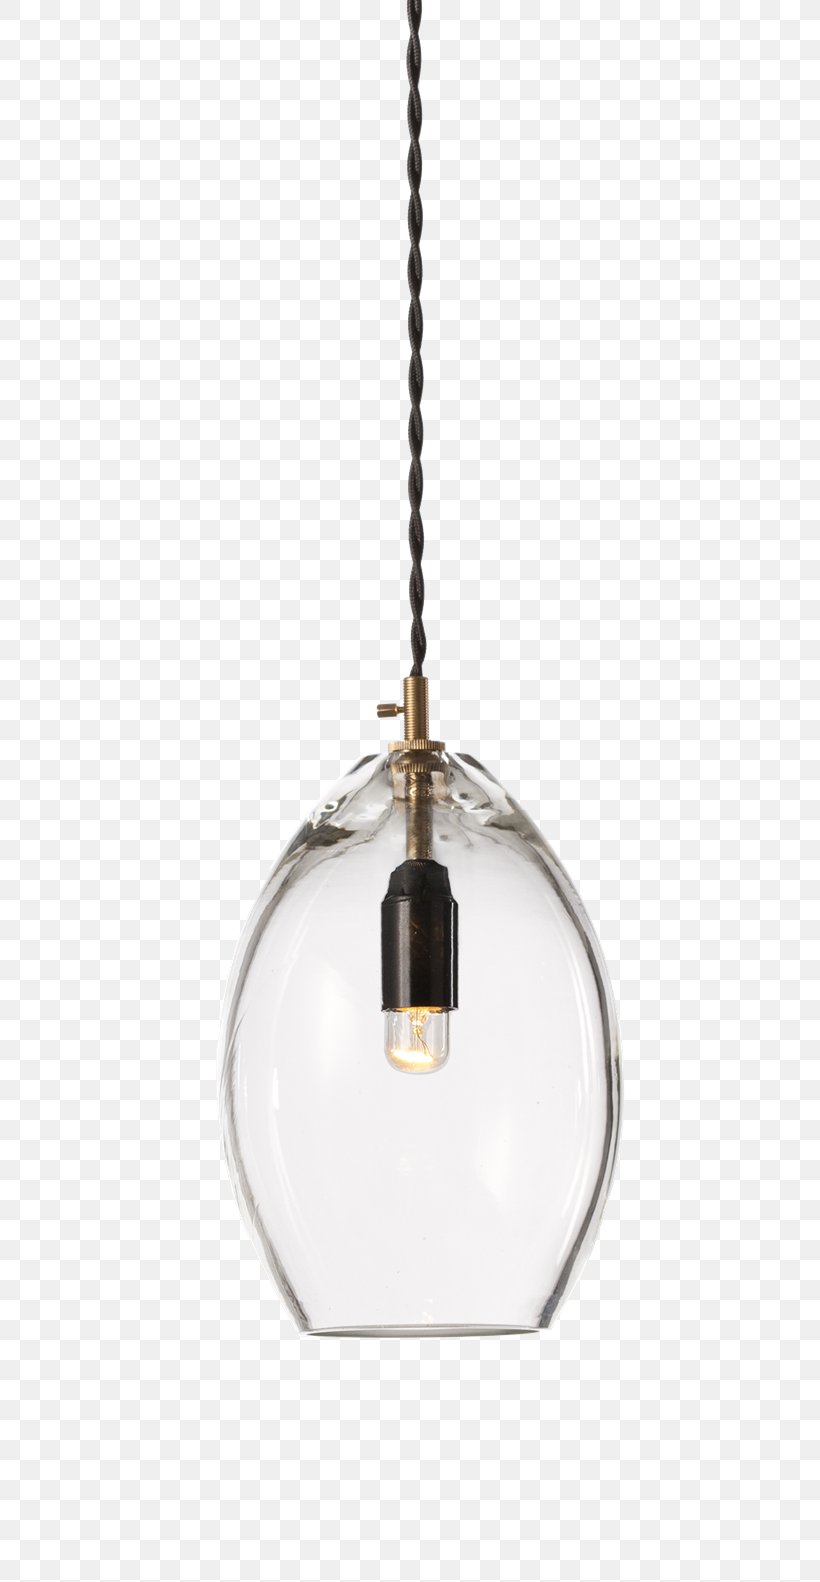 Northern Lighting Glass Lamp, PNG, 800x1582px, Lighting, Braid, Brass, Ceiling, Ceiling Fixture Download Free